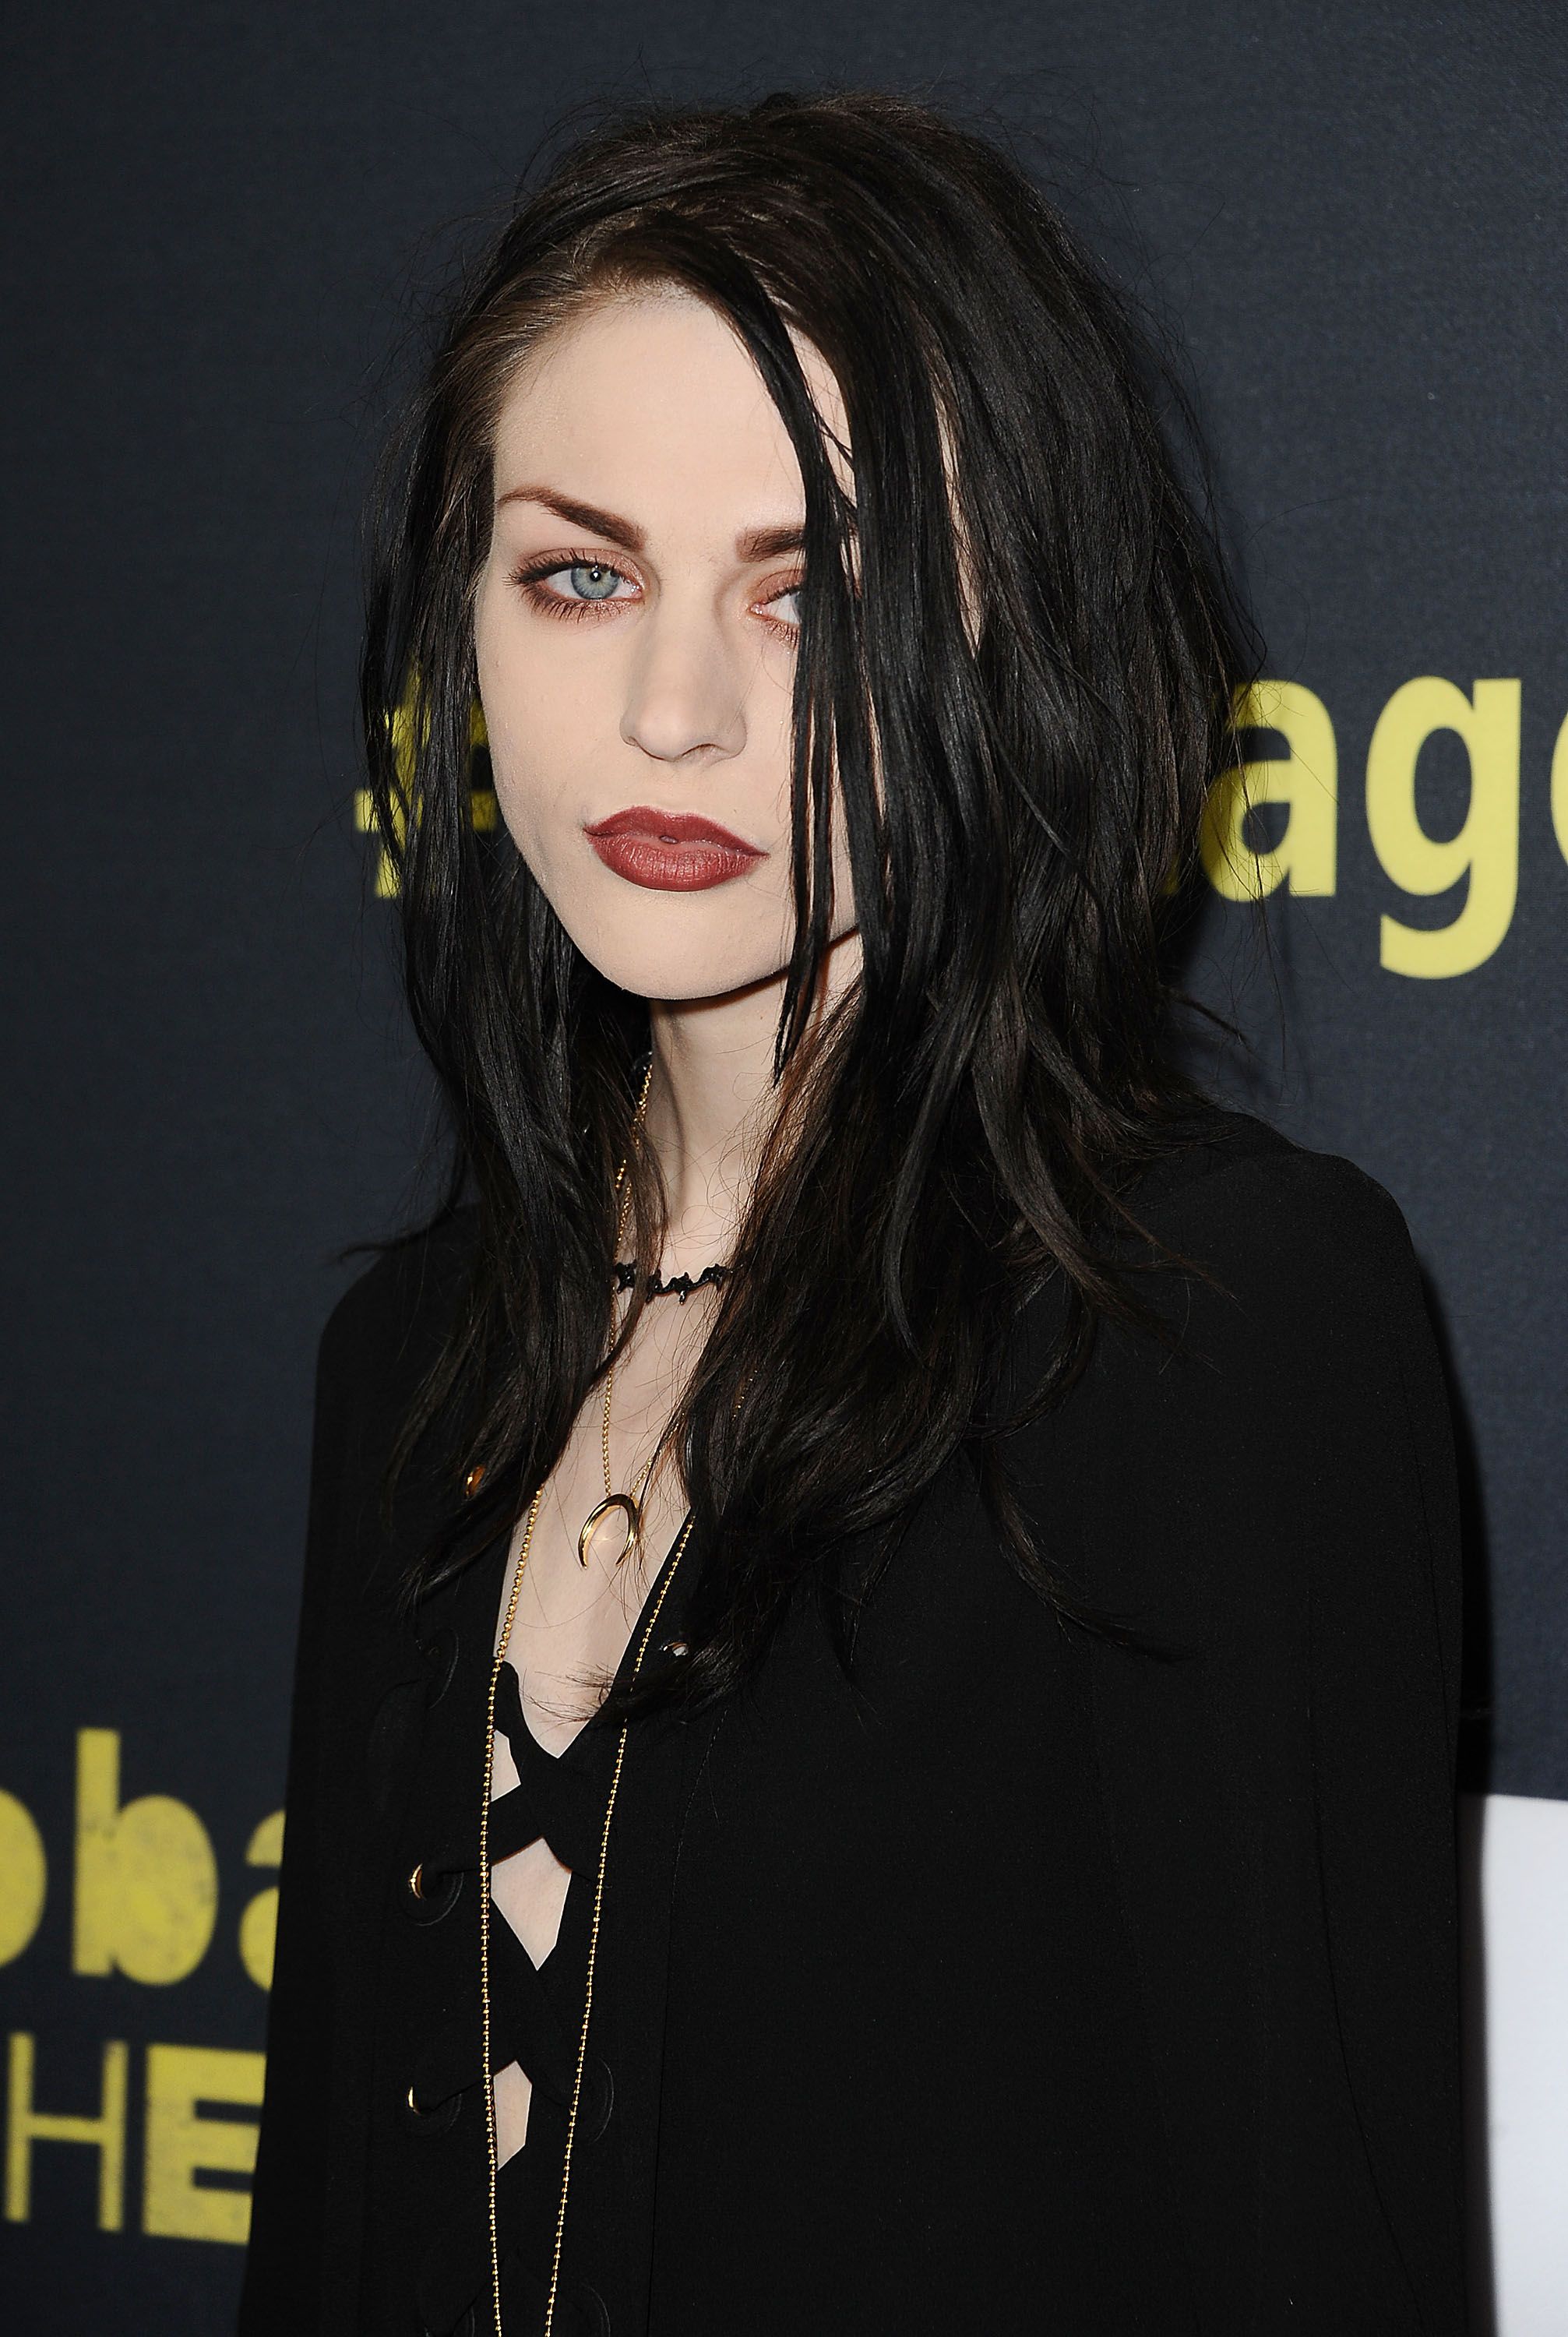 Frances Bean Cobain at the premiere of HBO's "Kurt Cobain: Montage Of Heck" in 2015 in Hollywood, California | Source: Getty Images